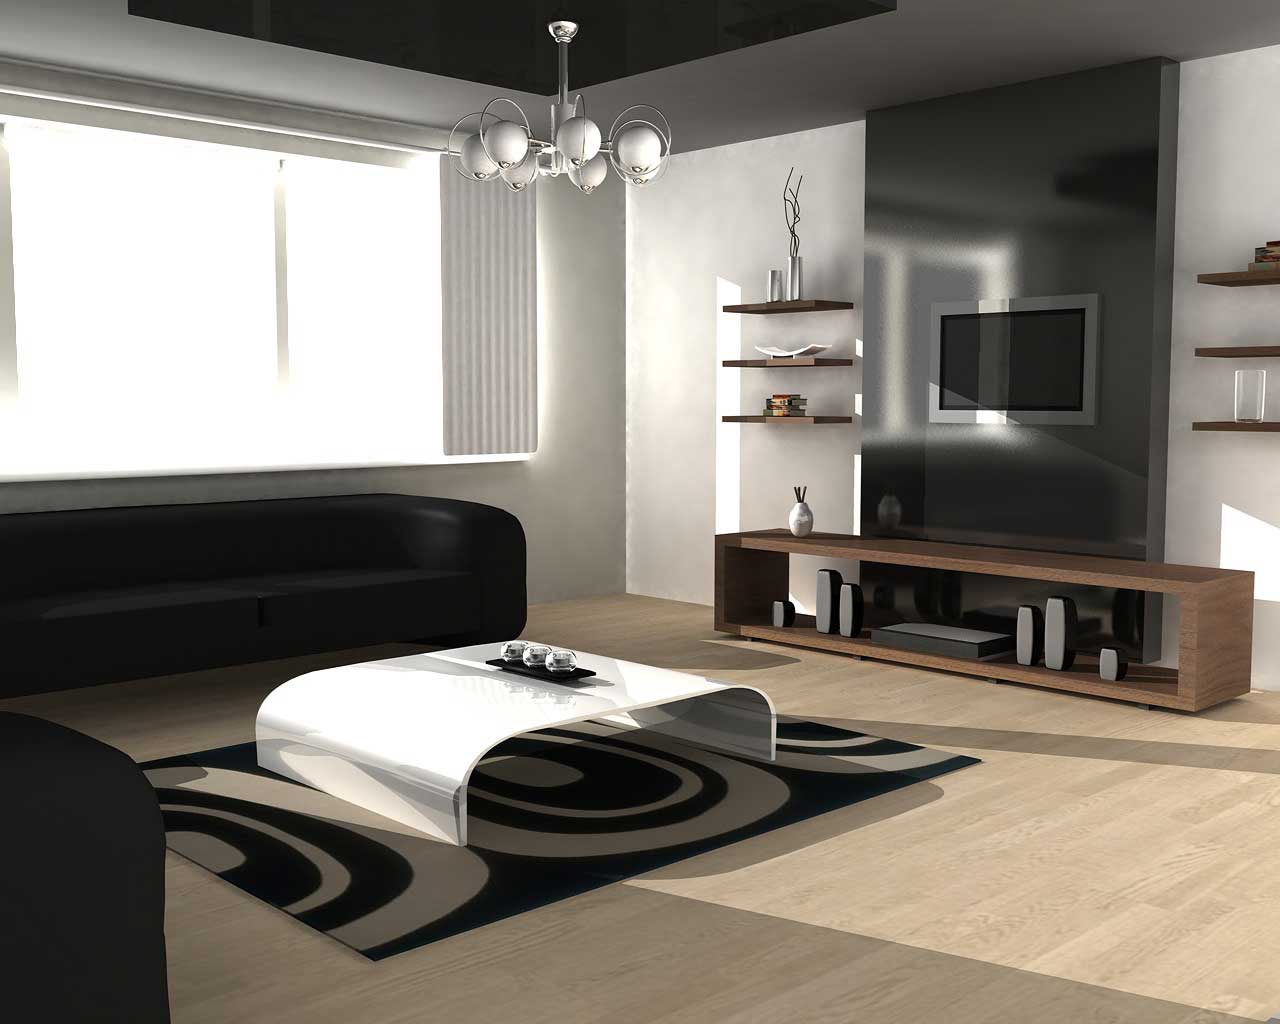 Black White Sets Modern Black White Living Room Sets Under 1000 Dollars Decor With Creative Curved White Gloss Coffee Table Design And Interesting Black Sofa Bed Ideas Also Rustic Light Brown Wooden Floor Idea Living Room Beautiful Living Room Sets As Suitable Furniture